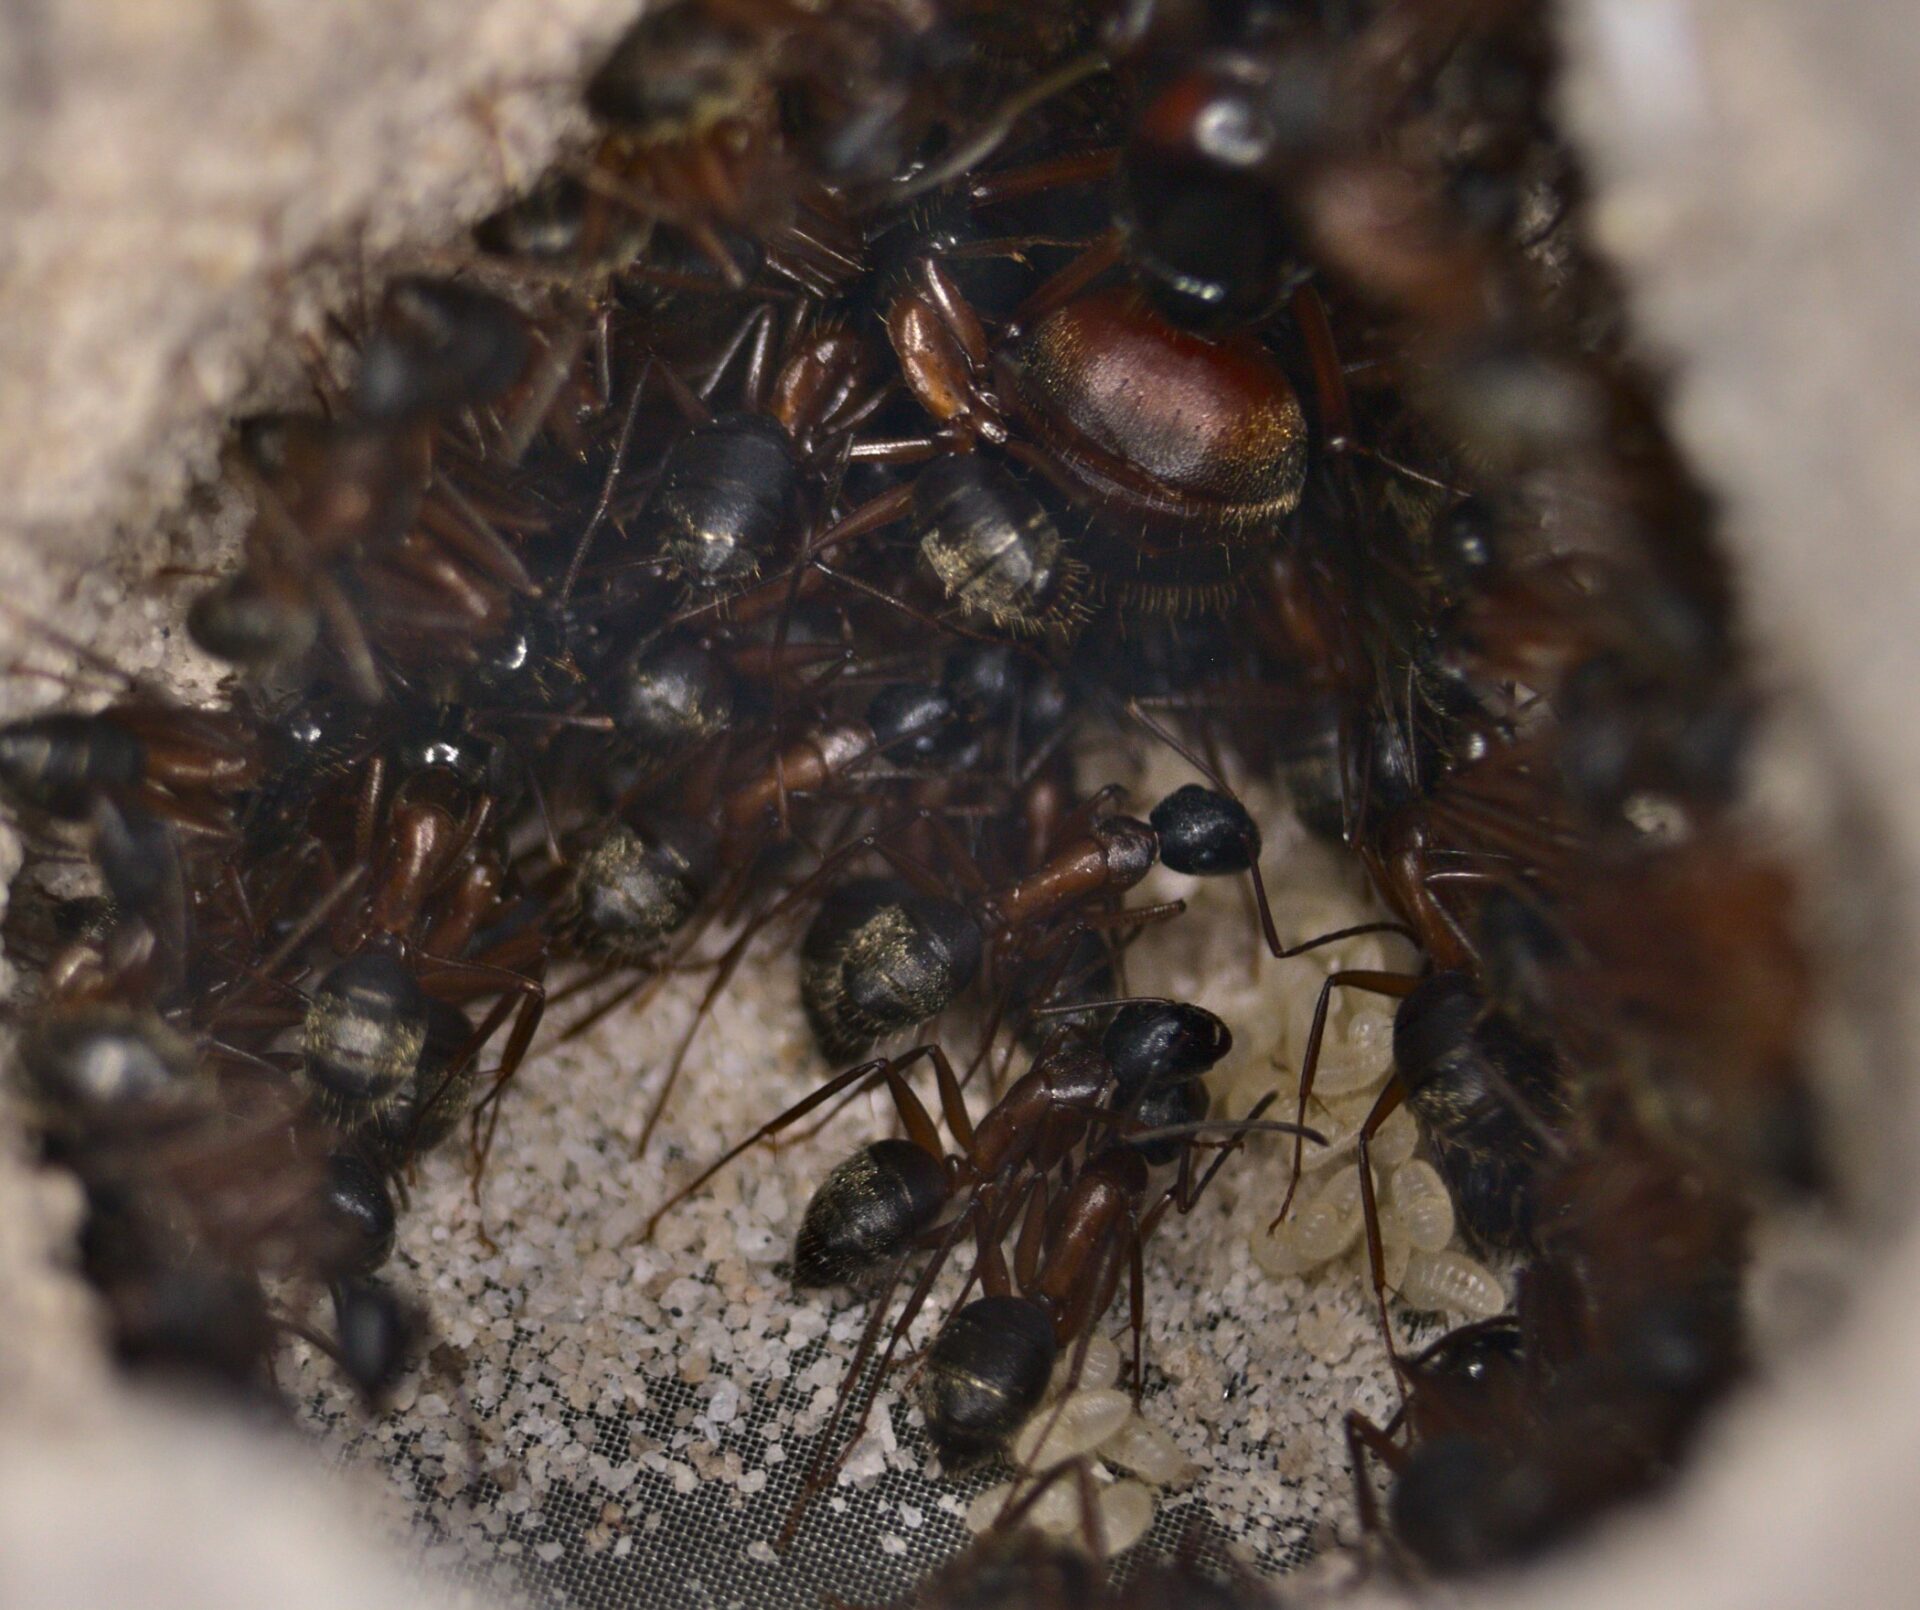 Camponotus chromaiodes workers caring for brood.